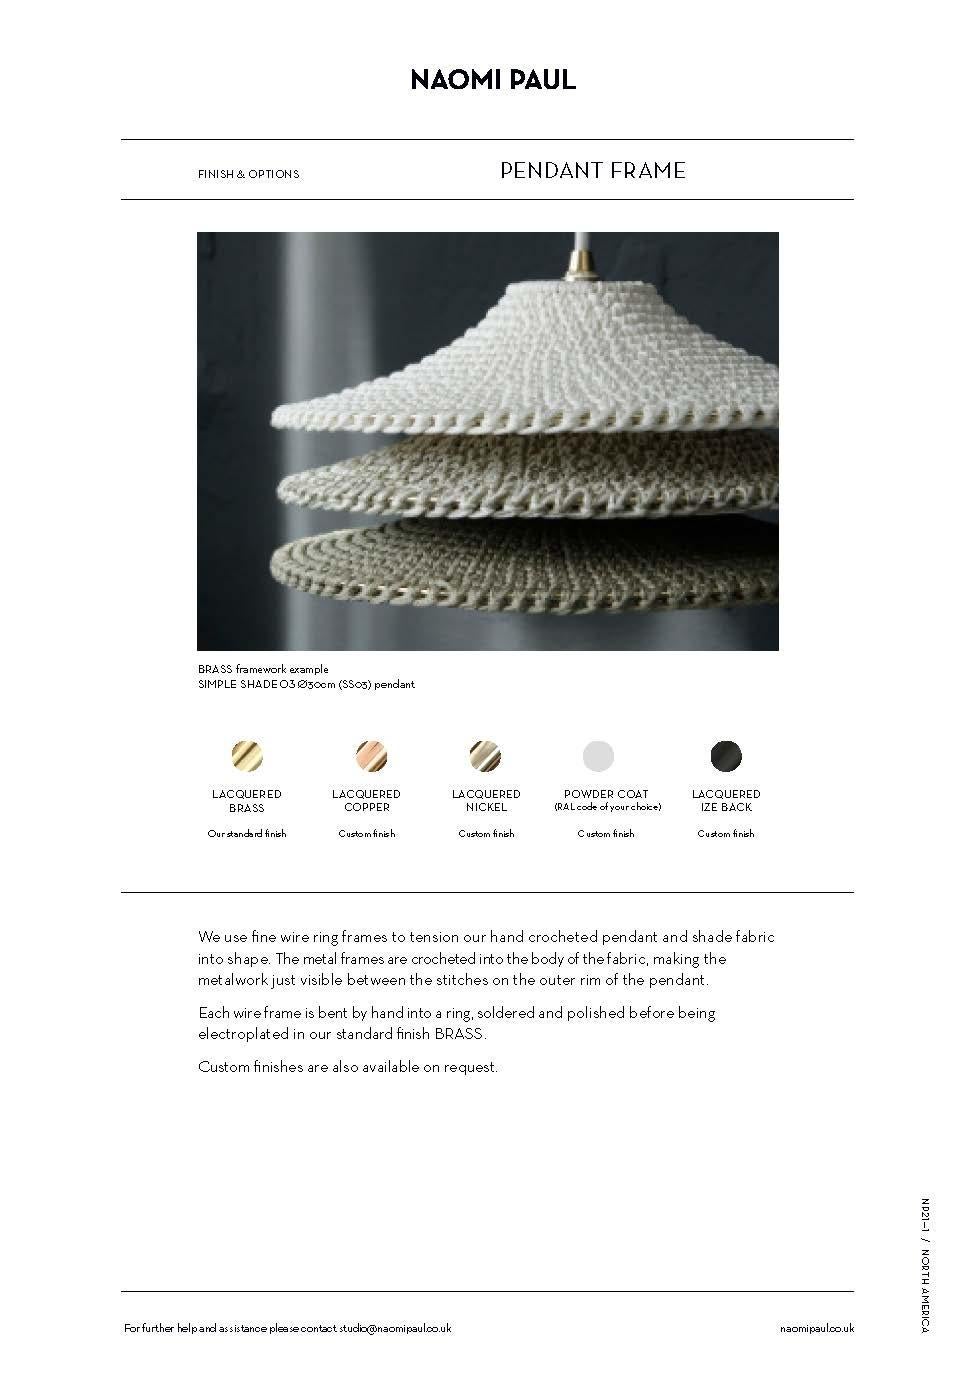 Metalwork BAMBOO SOLITAIRE 03 Pendant Light Ø80cm/31.5in, Hand Crocheted in Bamboo Paper